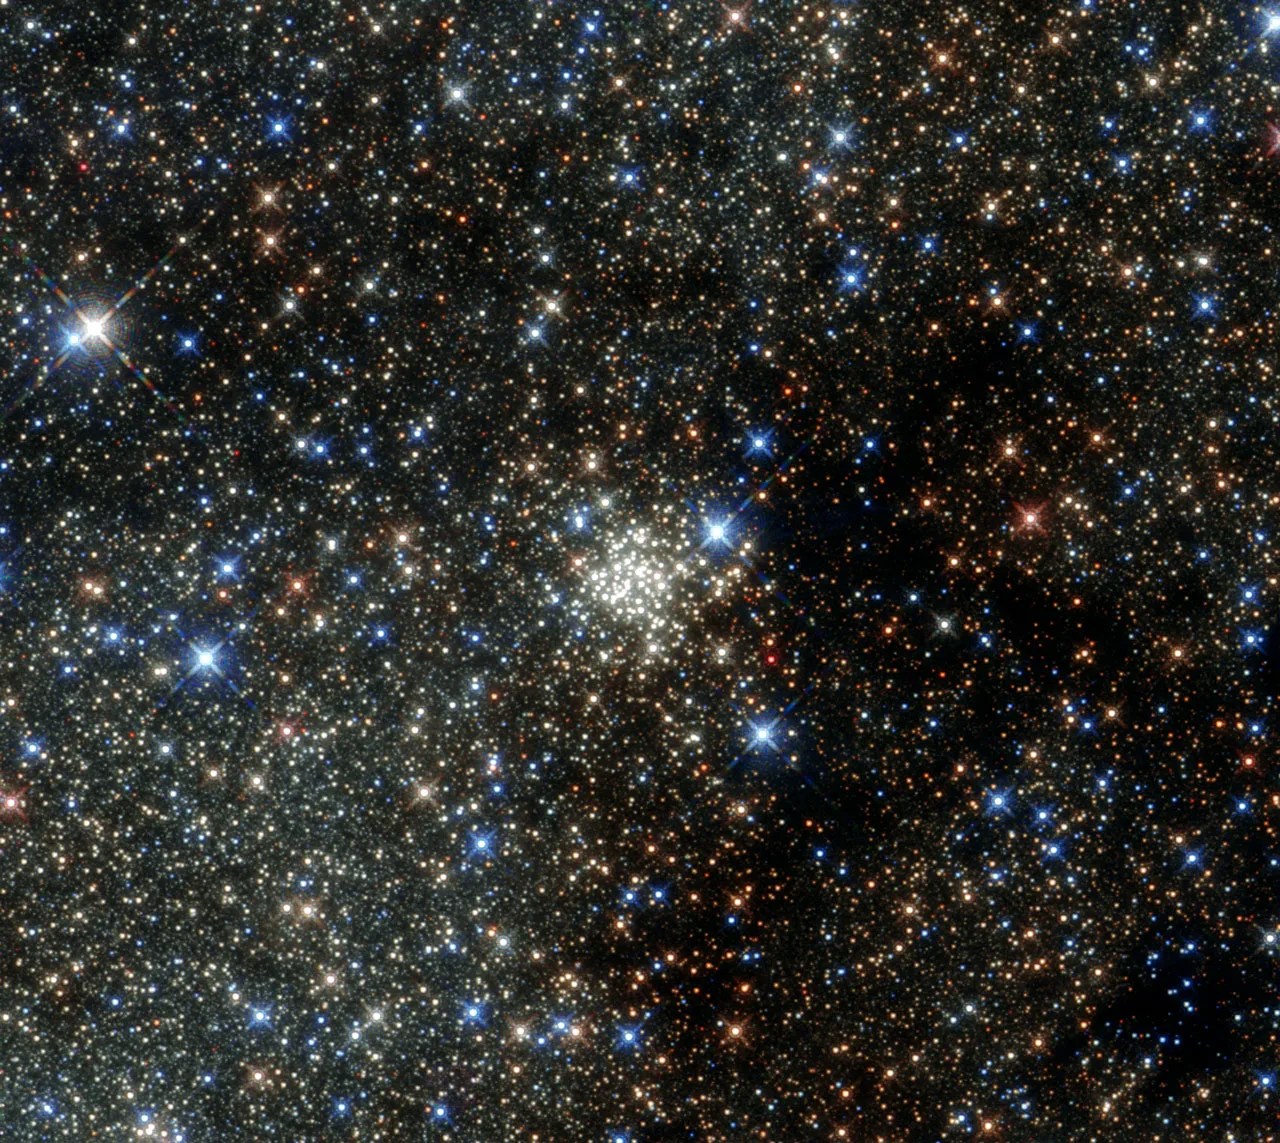 A field of stars on a black background